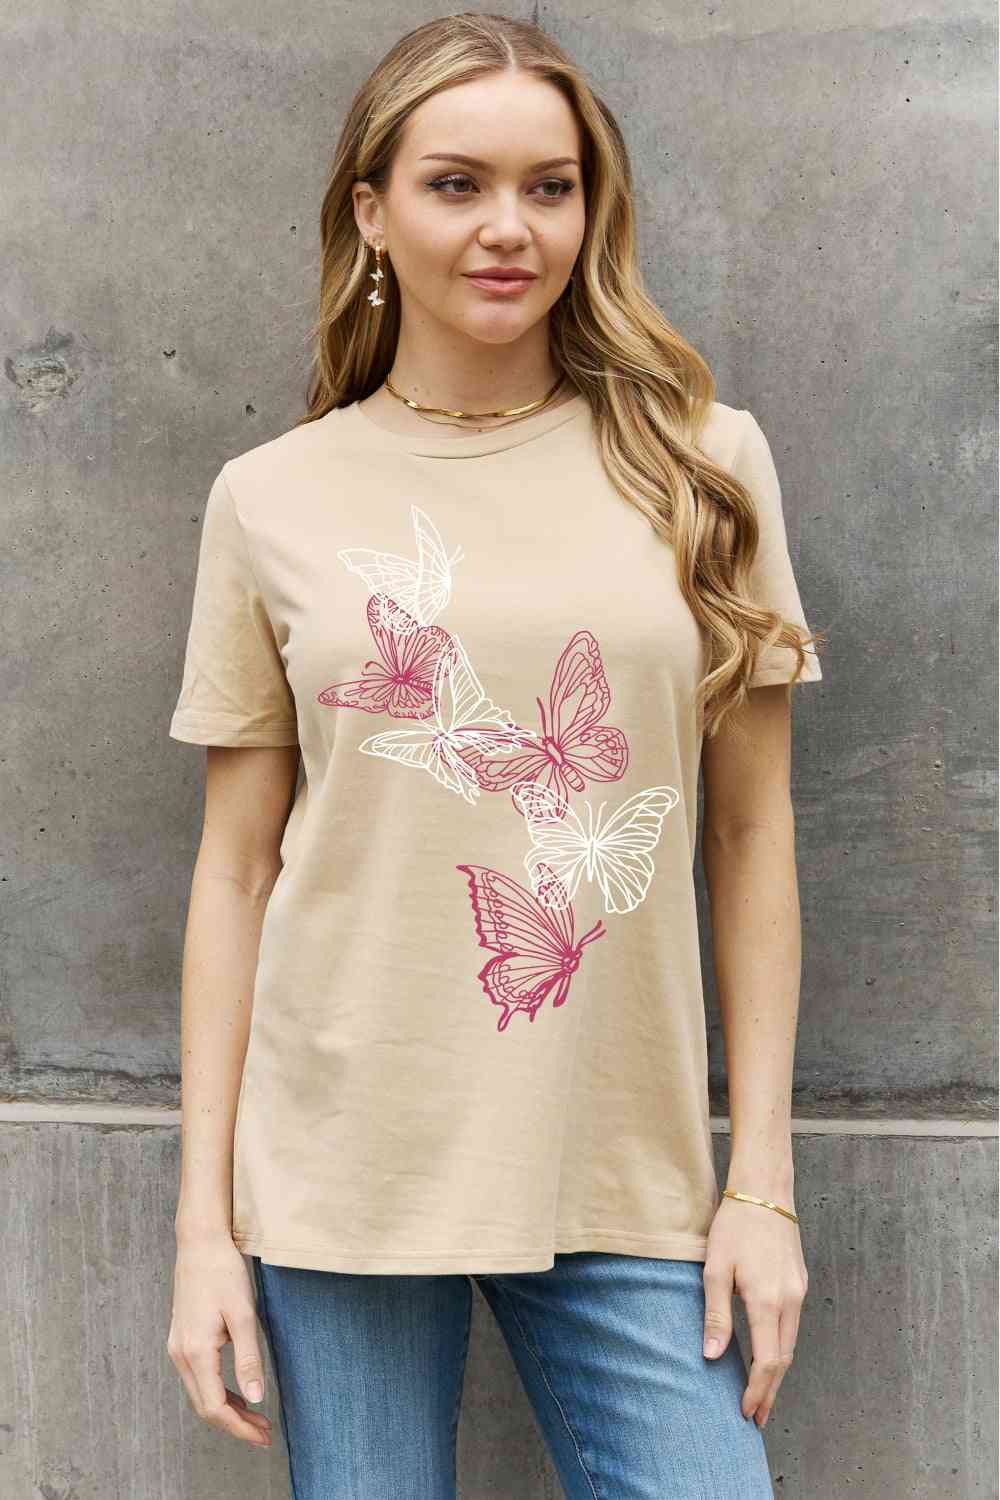 Butterfly Graphic Cotton Tee - T-Shirts - Shirts & Tops - 4 - 2024